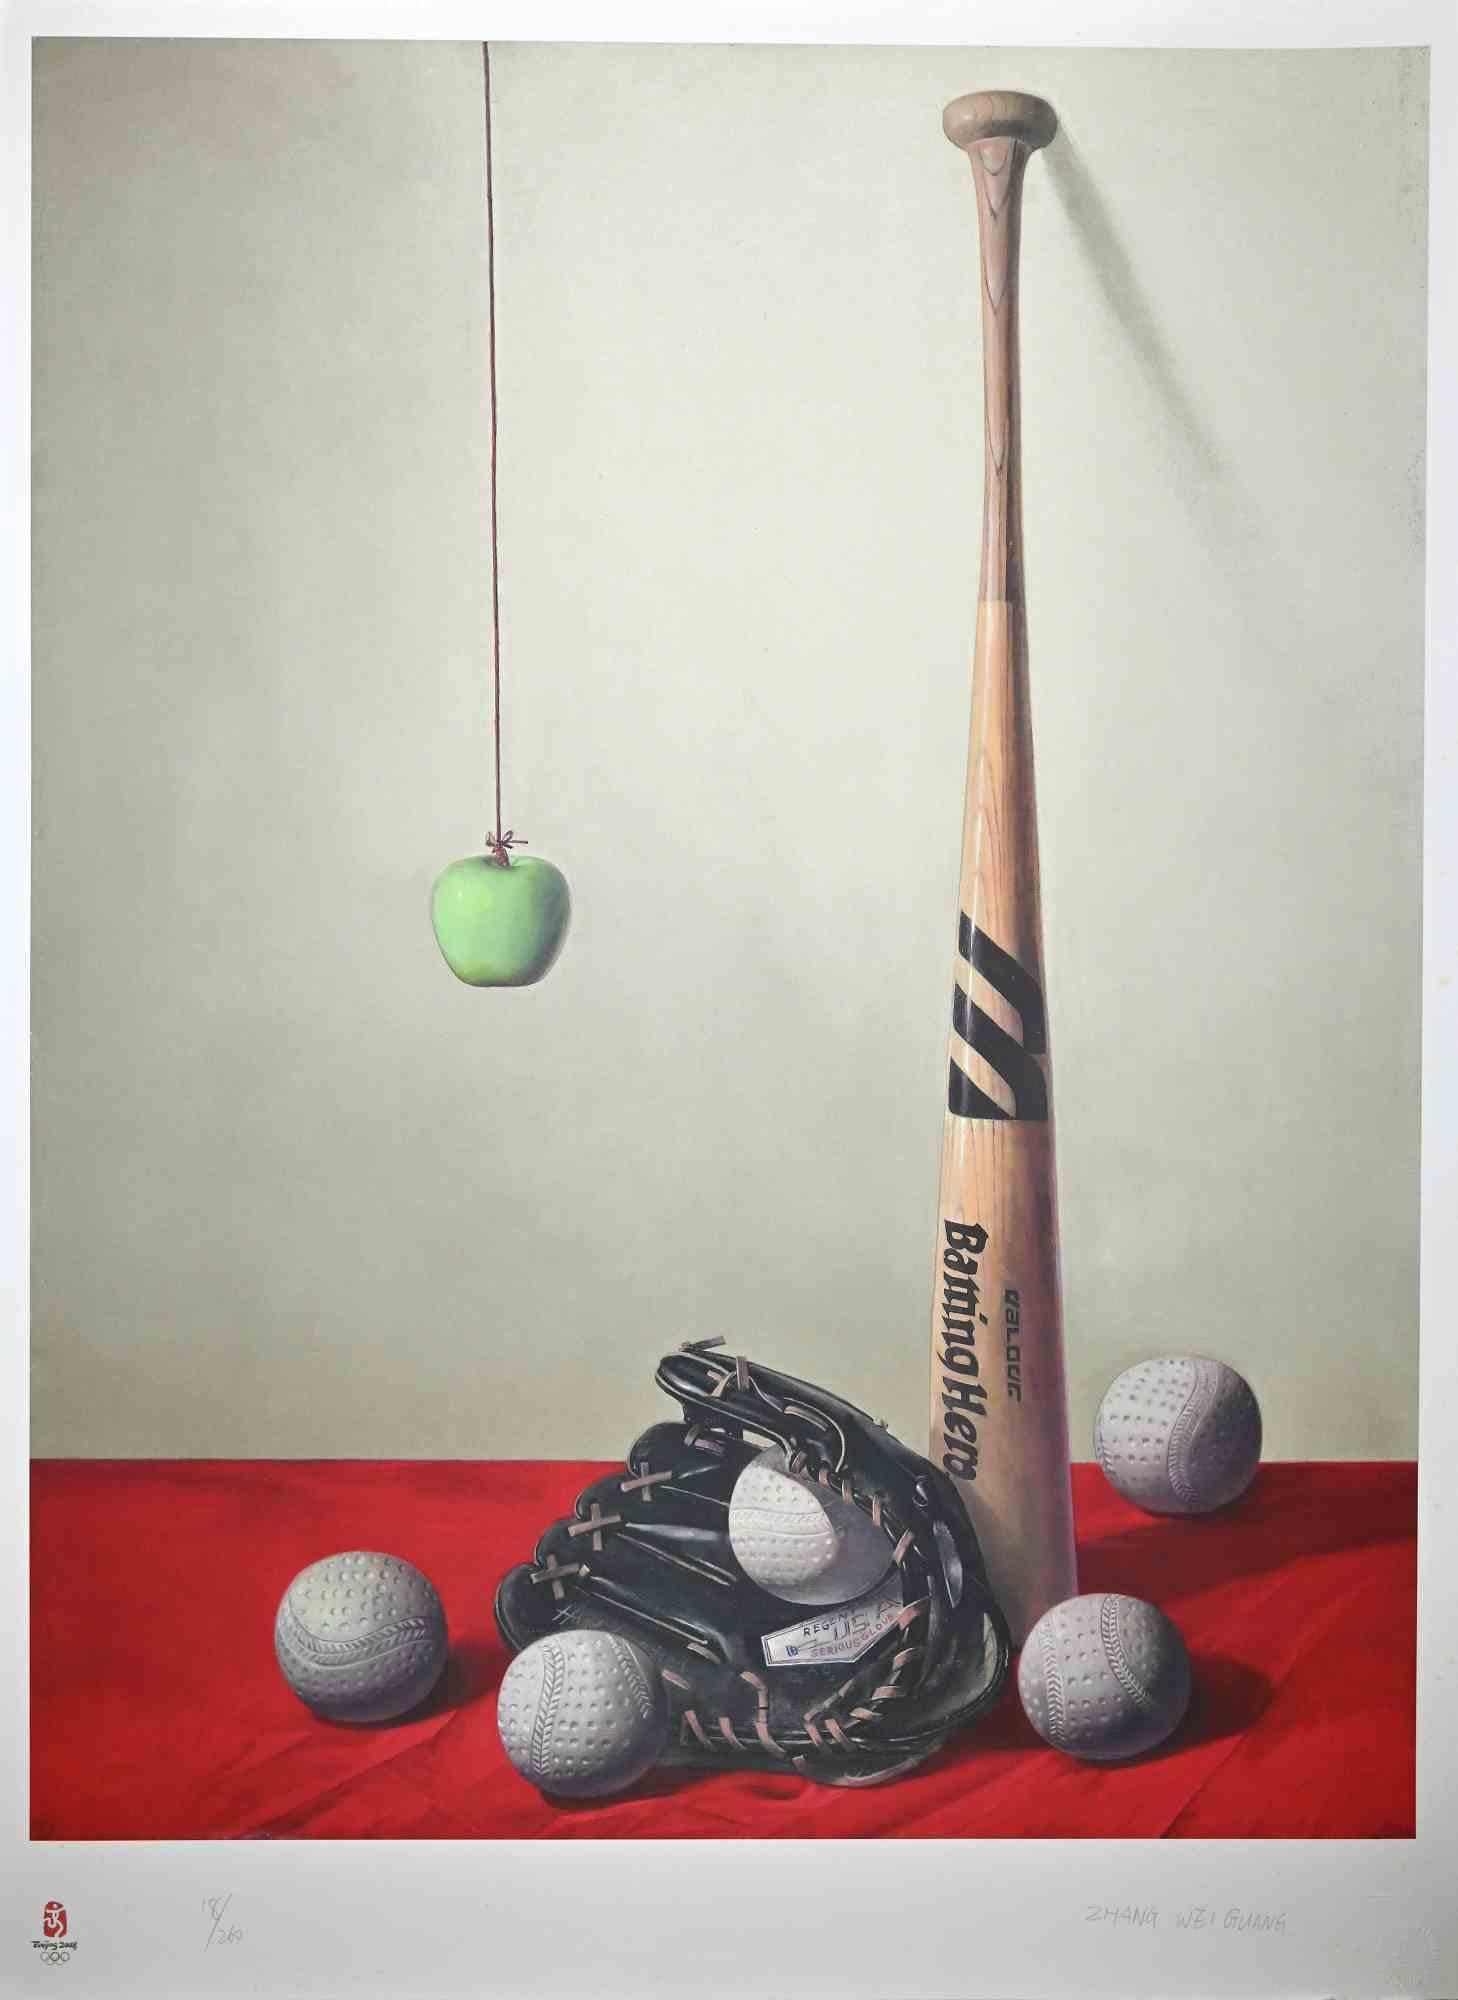 Baseball, Olympic Games Beijing 2008 is an original lithograph realized by Zhang Wei Guang (Mirror).

 This artwork is from the portfolio The Unique Collection for the Olympic Fine Arts 2008 presented during the Olympic Games and produced in 260